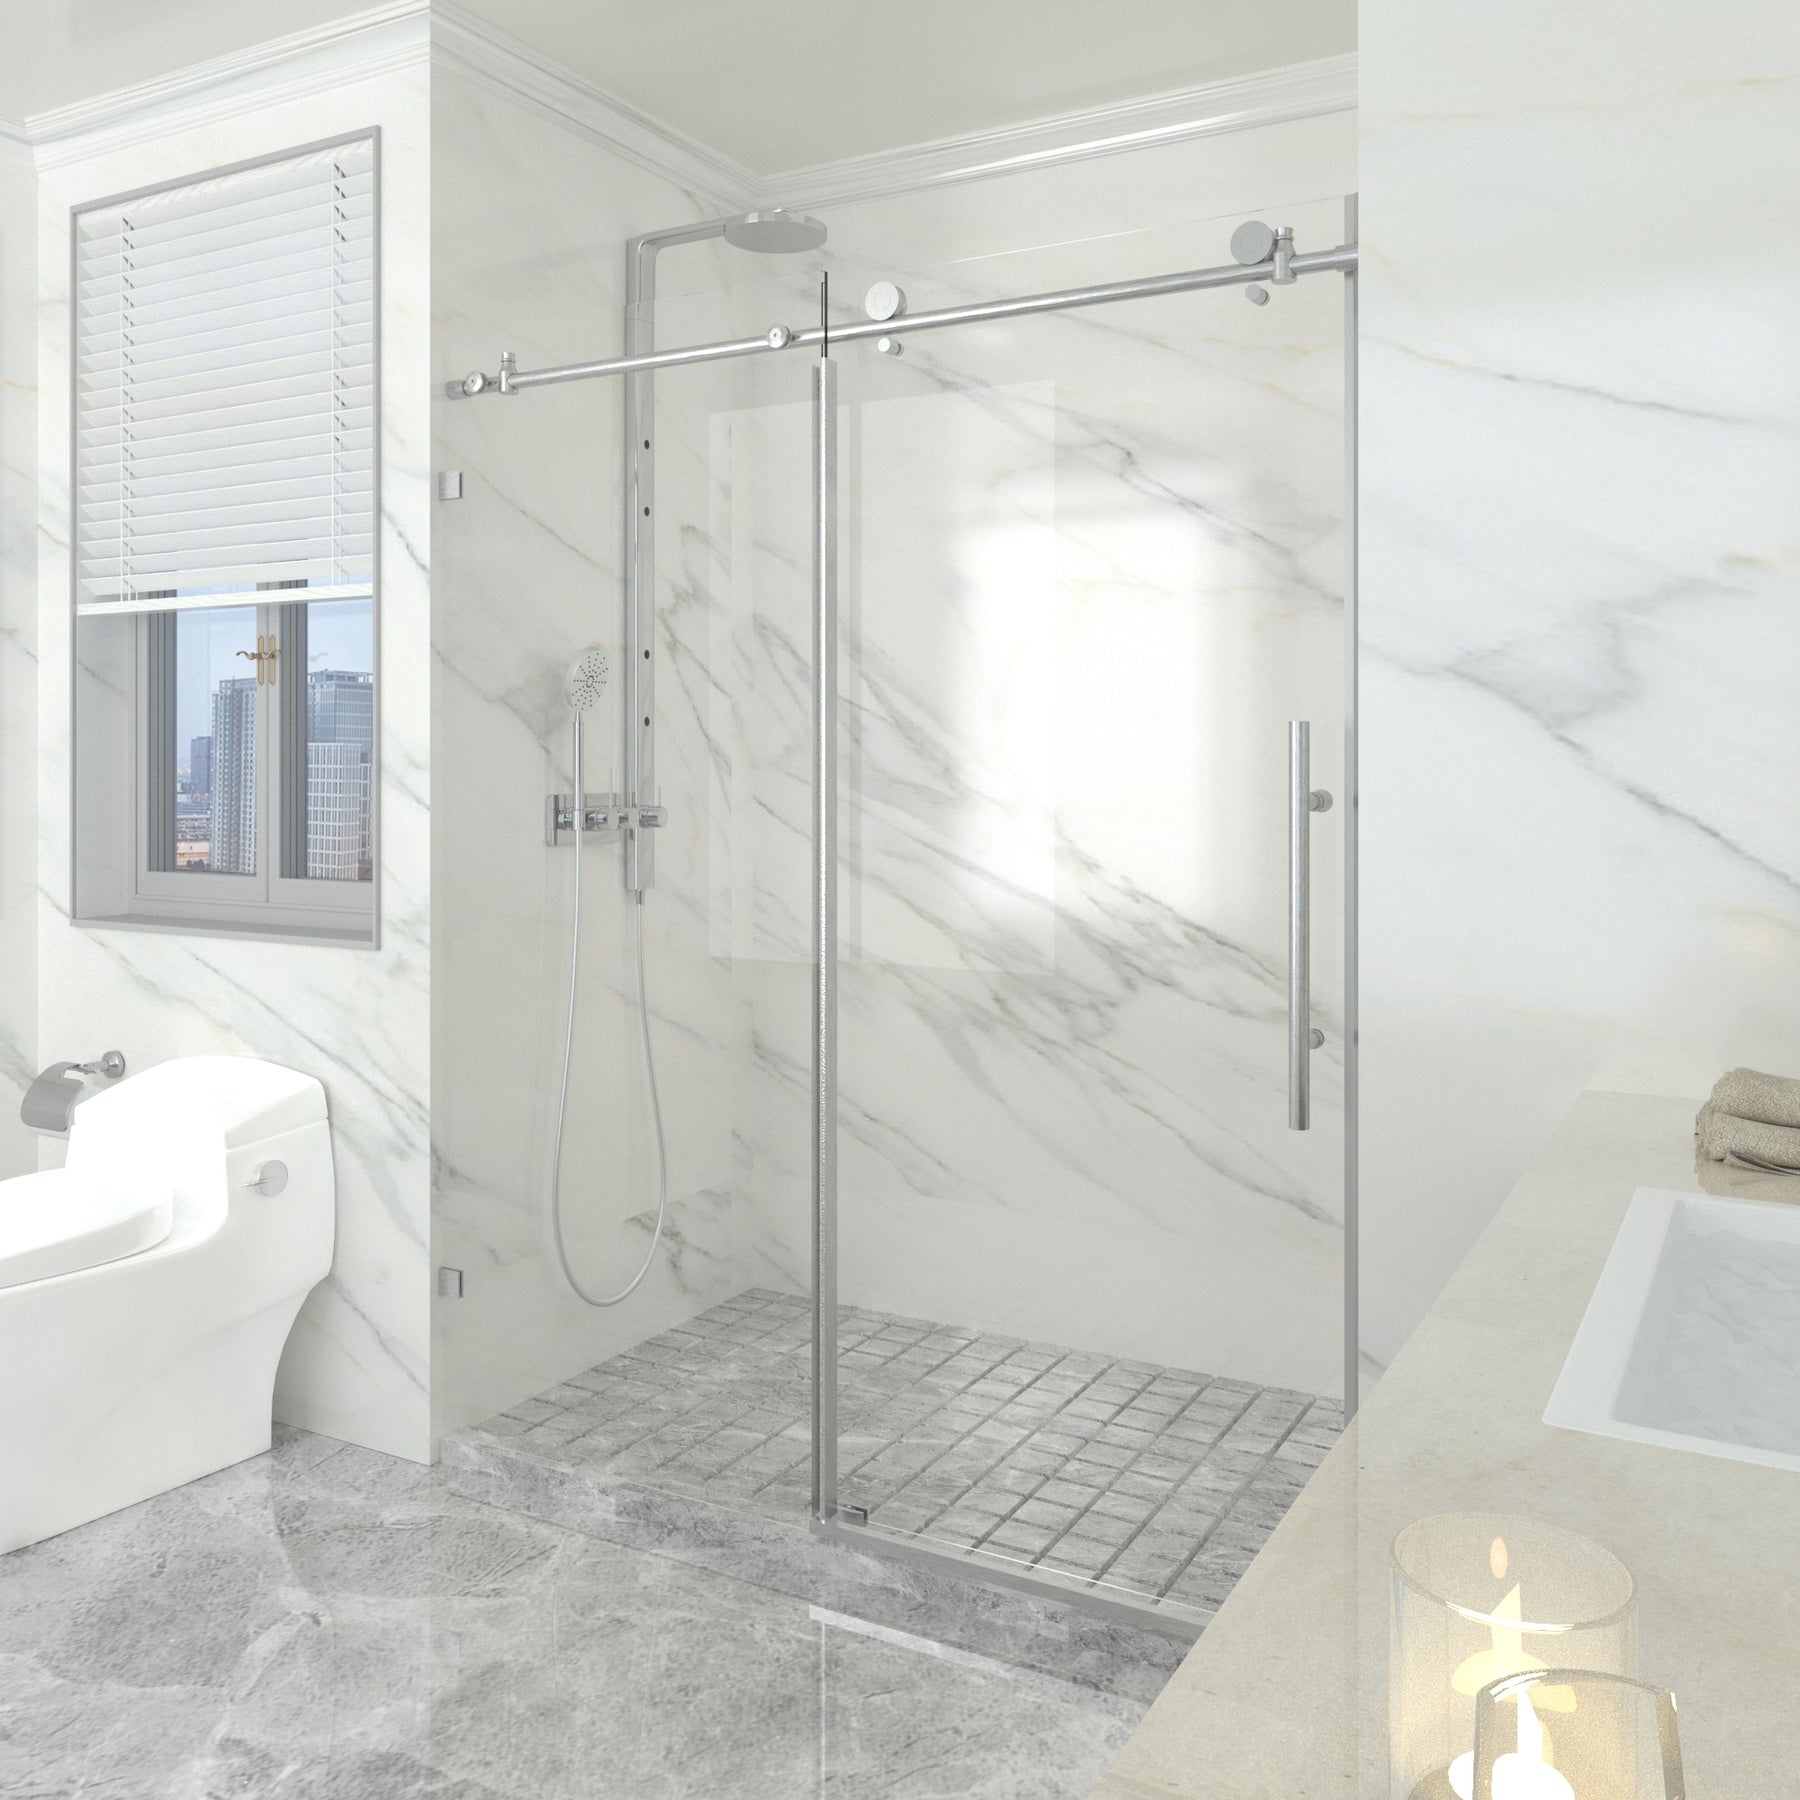 SL4U Frameless Sliding Shower Door with 3/8'' Clear Glass, Brushed Nickel Finish, 60'' W x 72-79'' H.